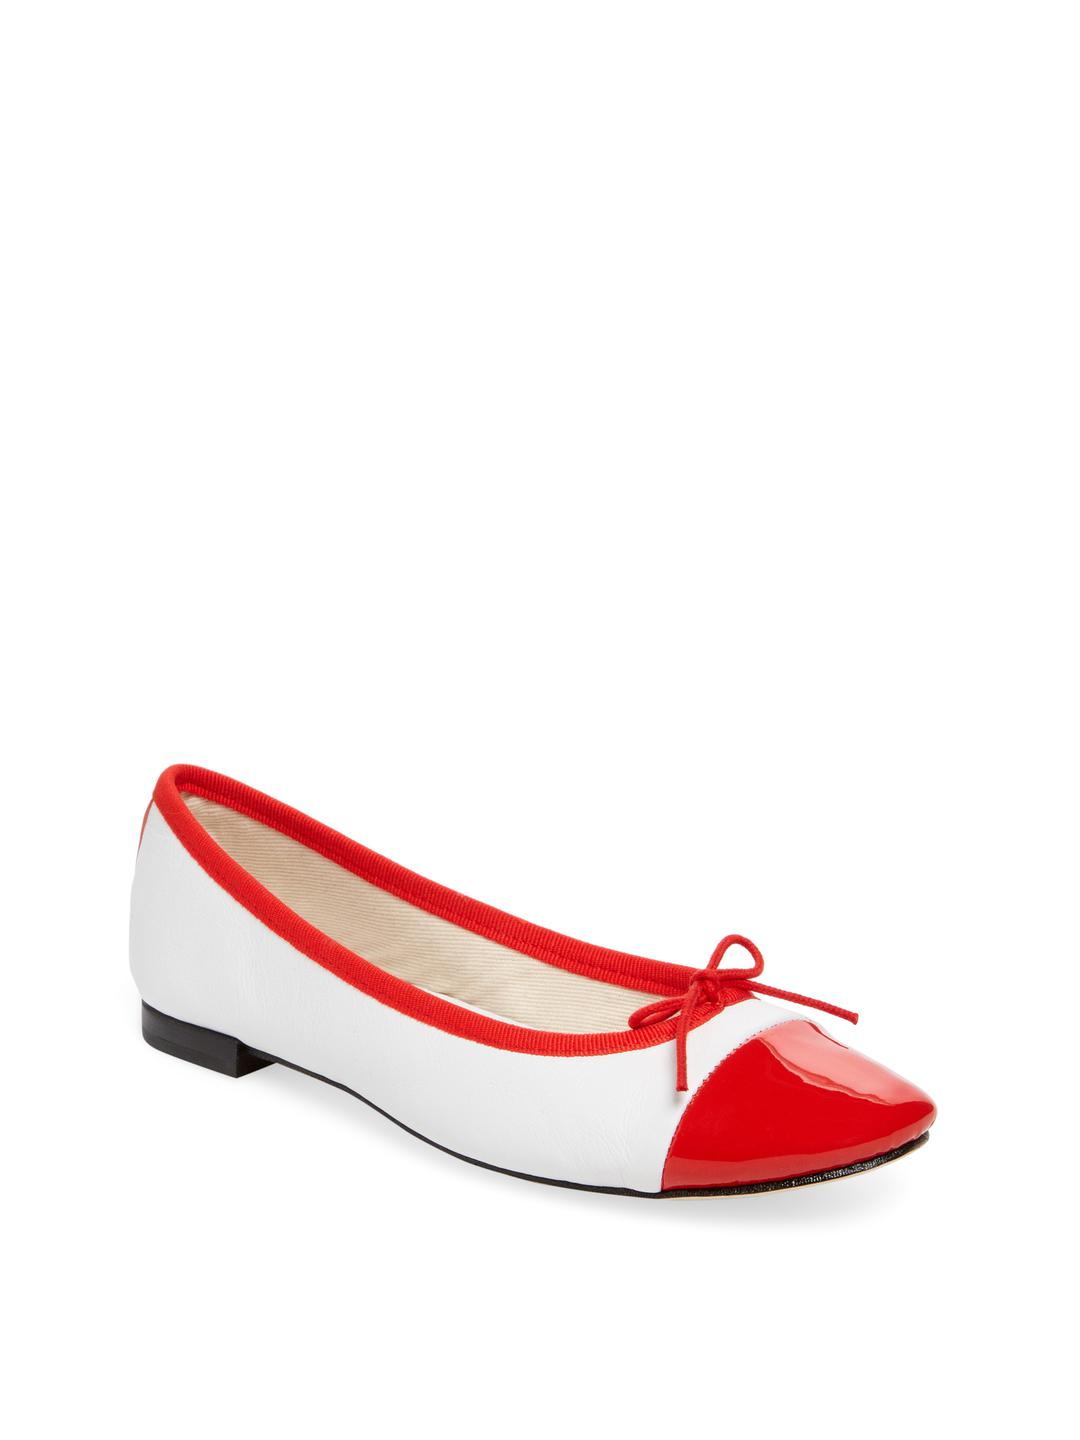 Repetto Flora Leather Ballet Flat in Red - Lyst